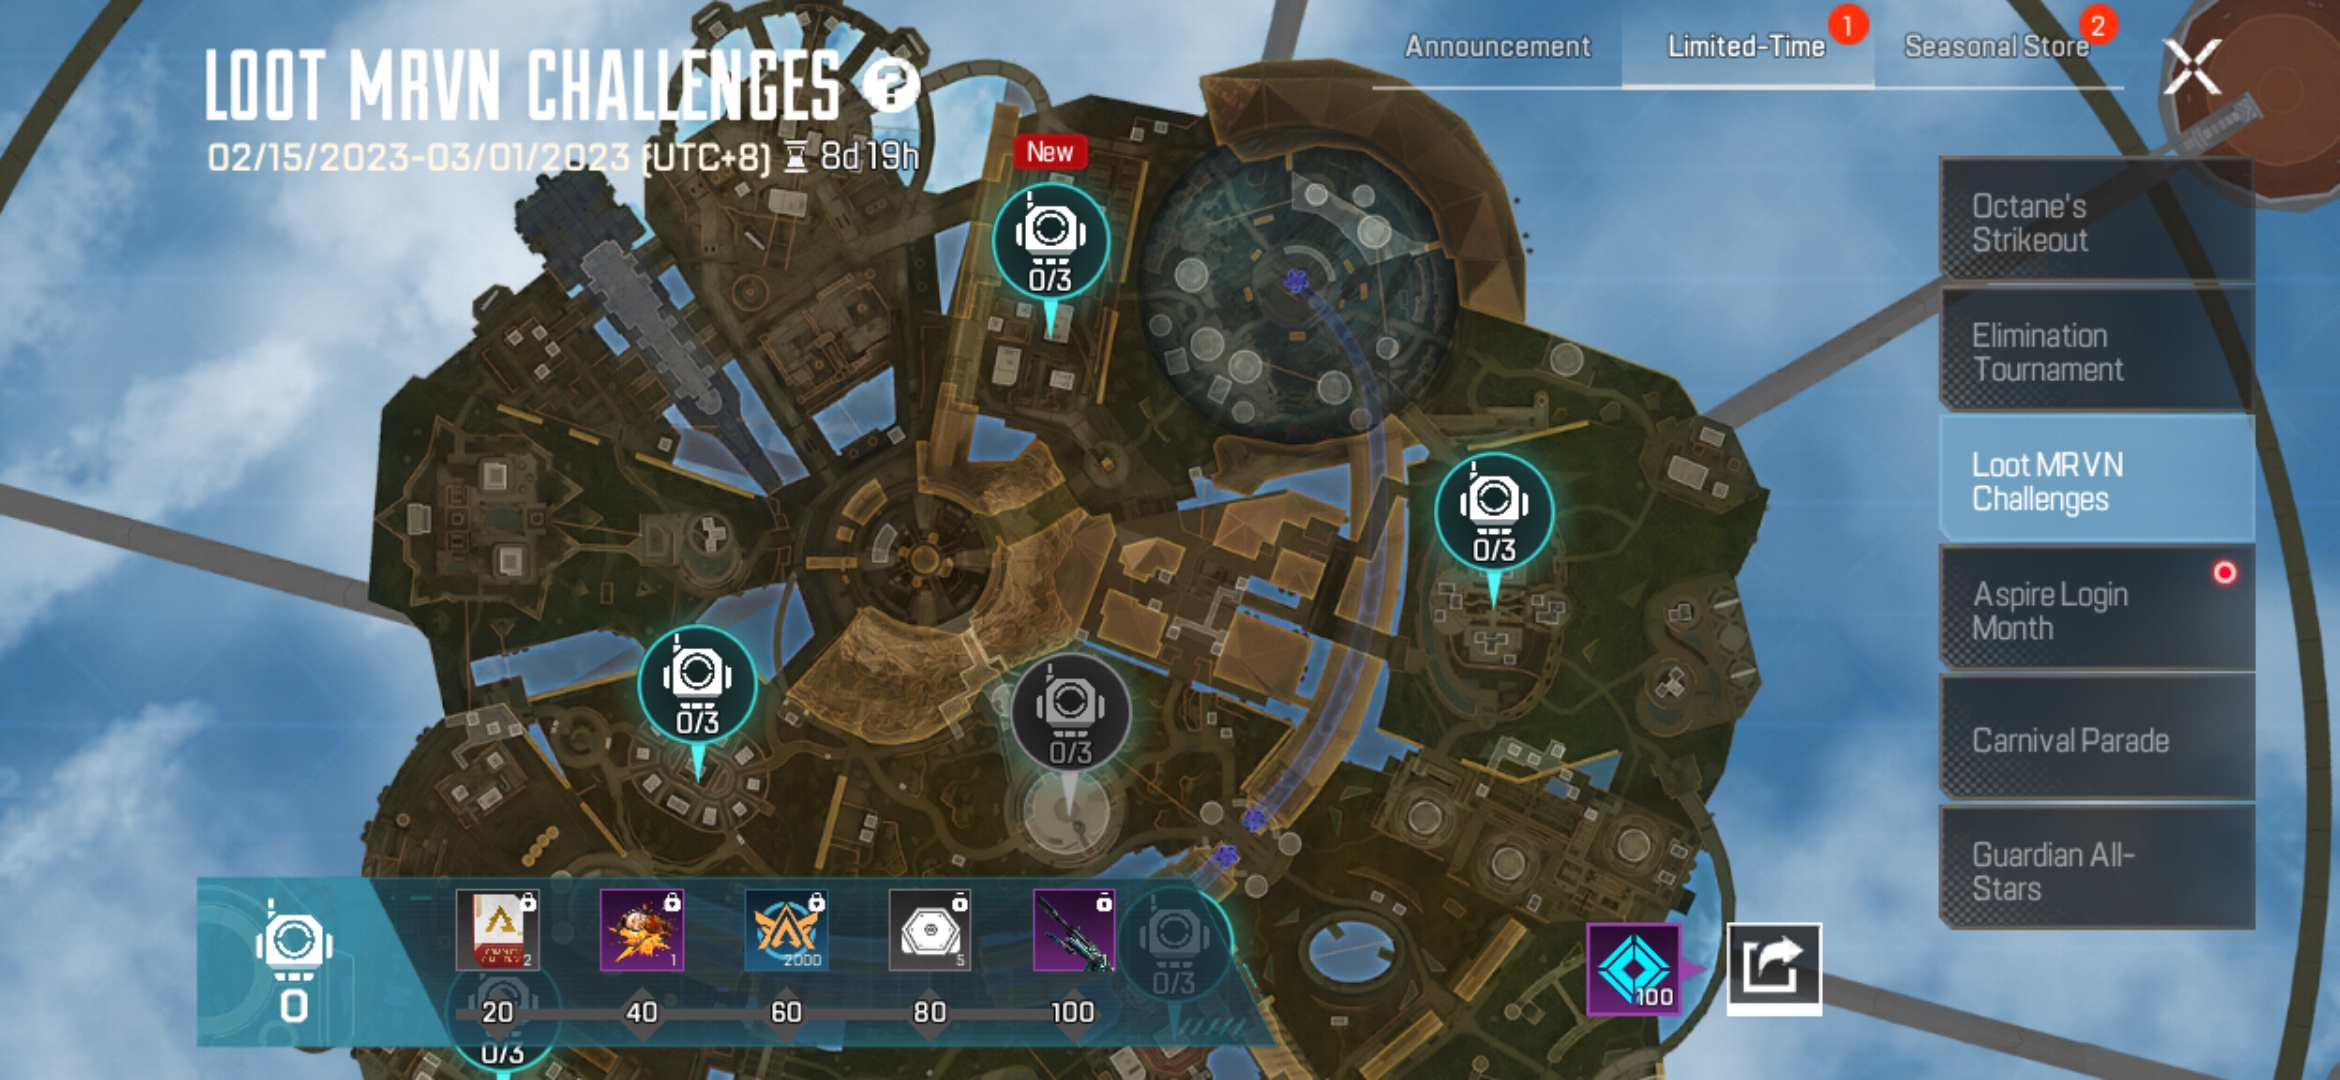 Apex Legends Mobile: Loot MRVN Challenges Event Guide